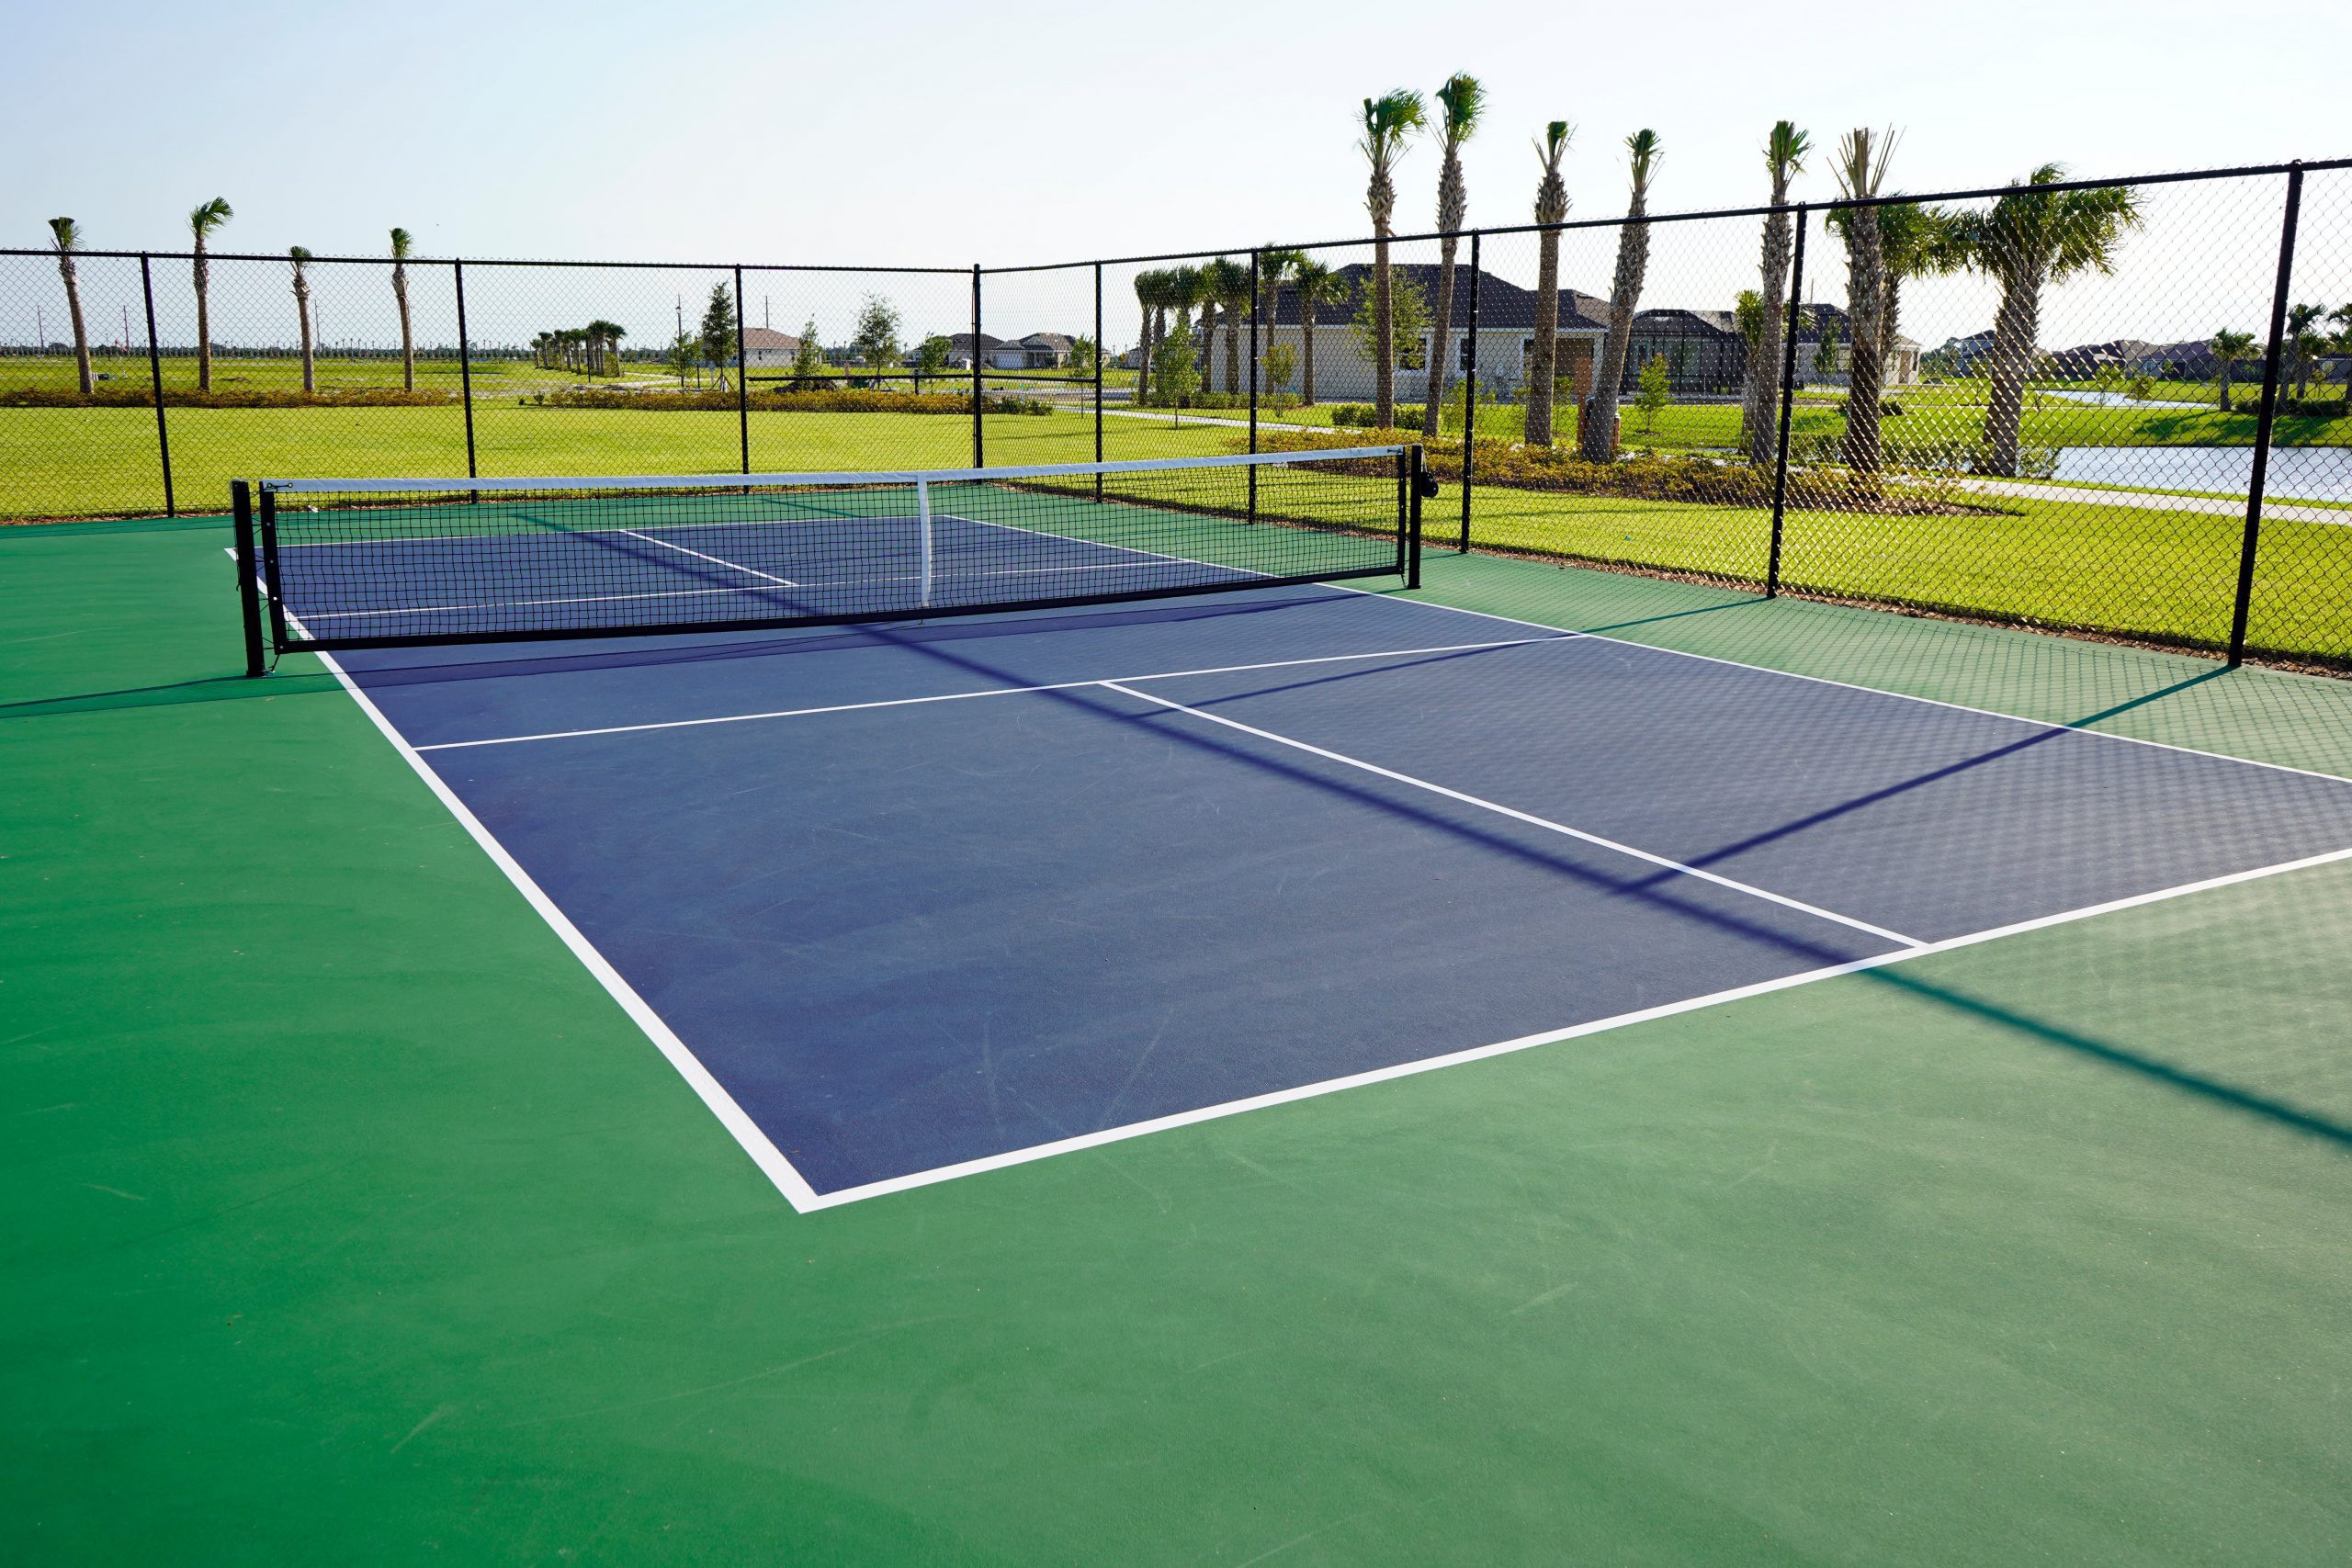 How long is a pickleball court